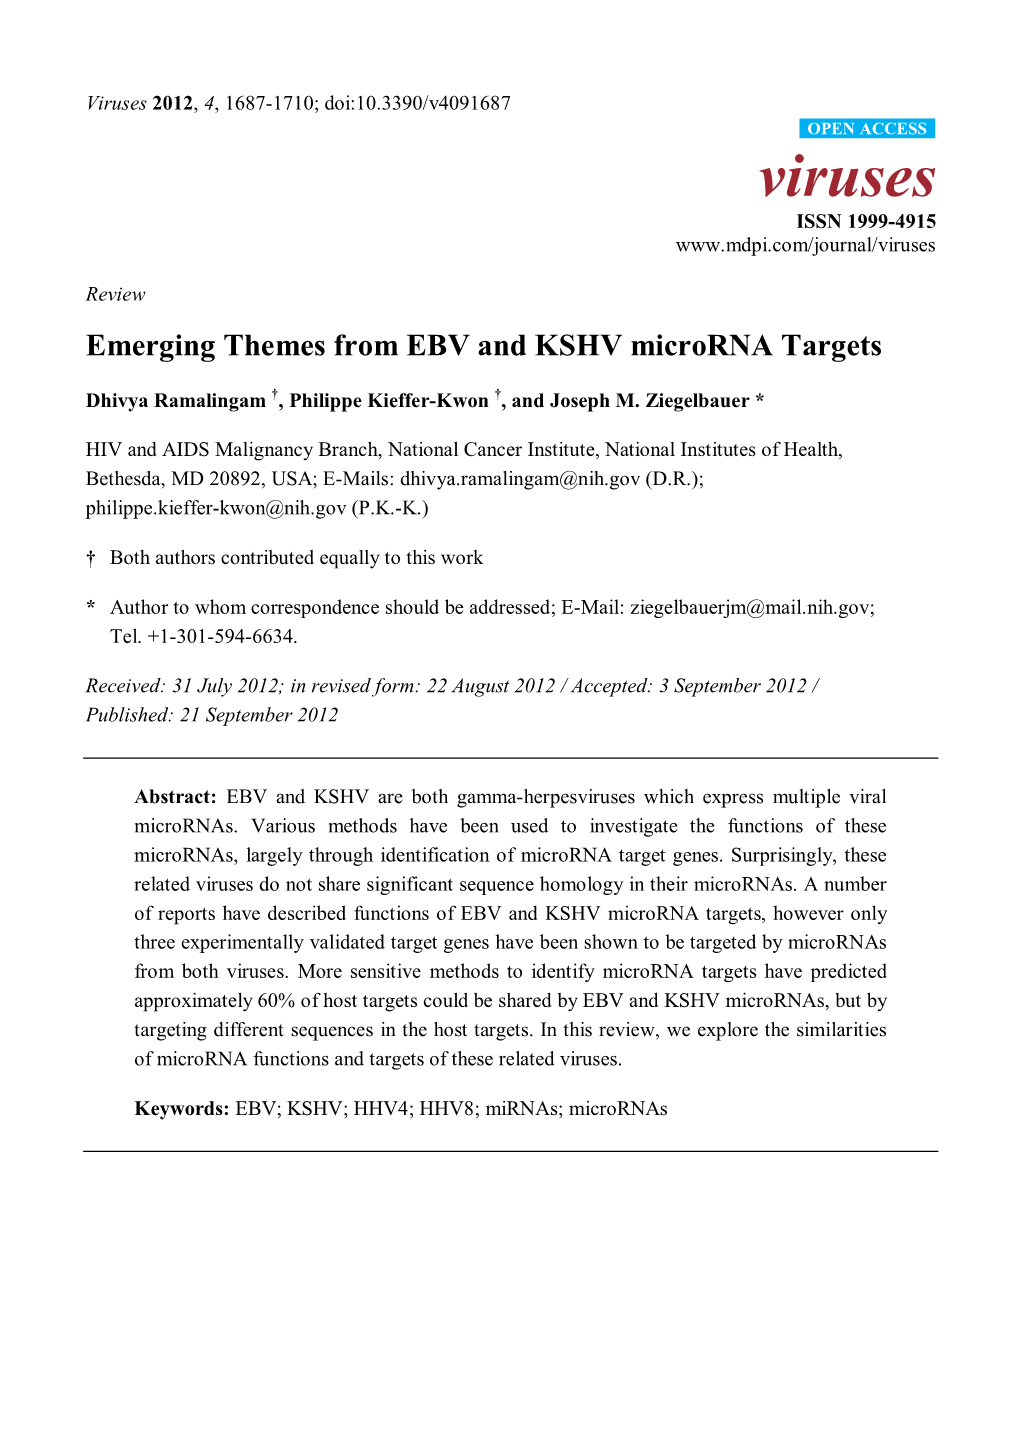 Emerging Themes from EBV and KSHV Microrna Targets